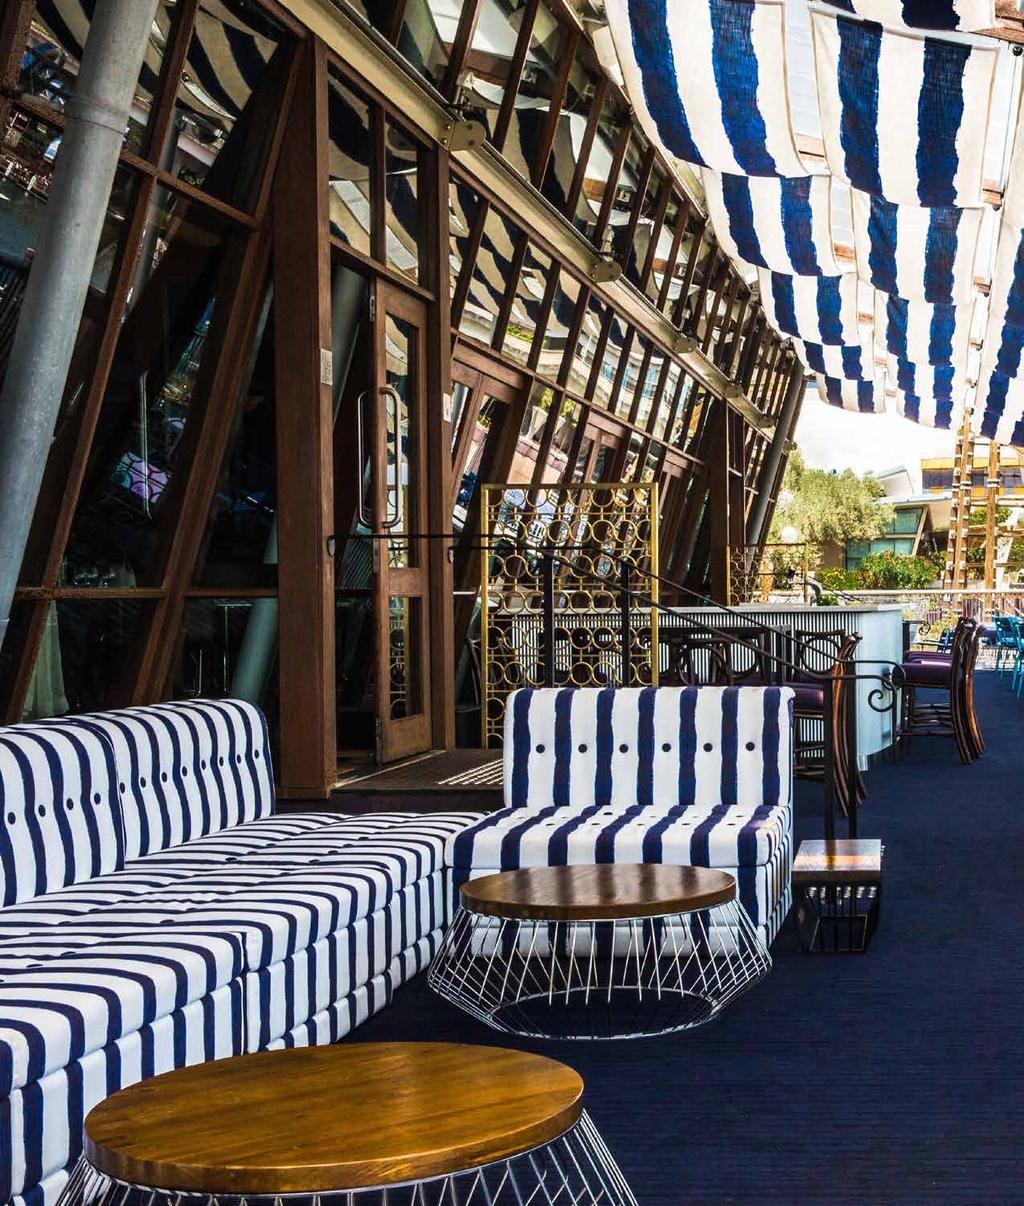 EVENT SPACES Café de Mar has flexible spaces such as an intimate Private Dining Room which boasts two exclusive terraces, a spectacular outdoor terrace that overlooks Darling Harbour as well as a